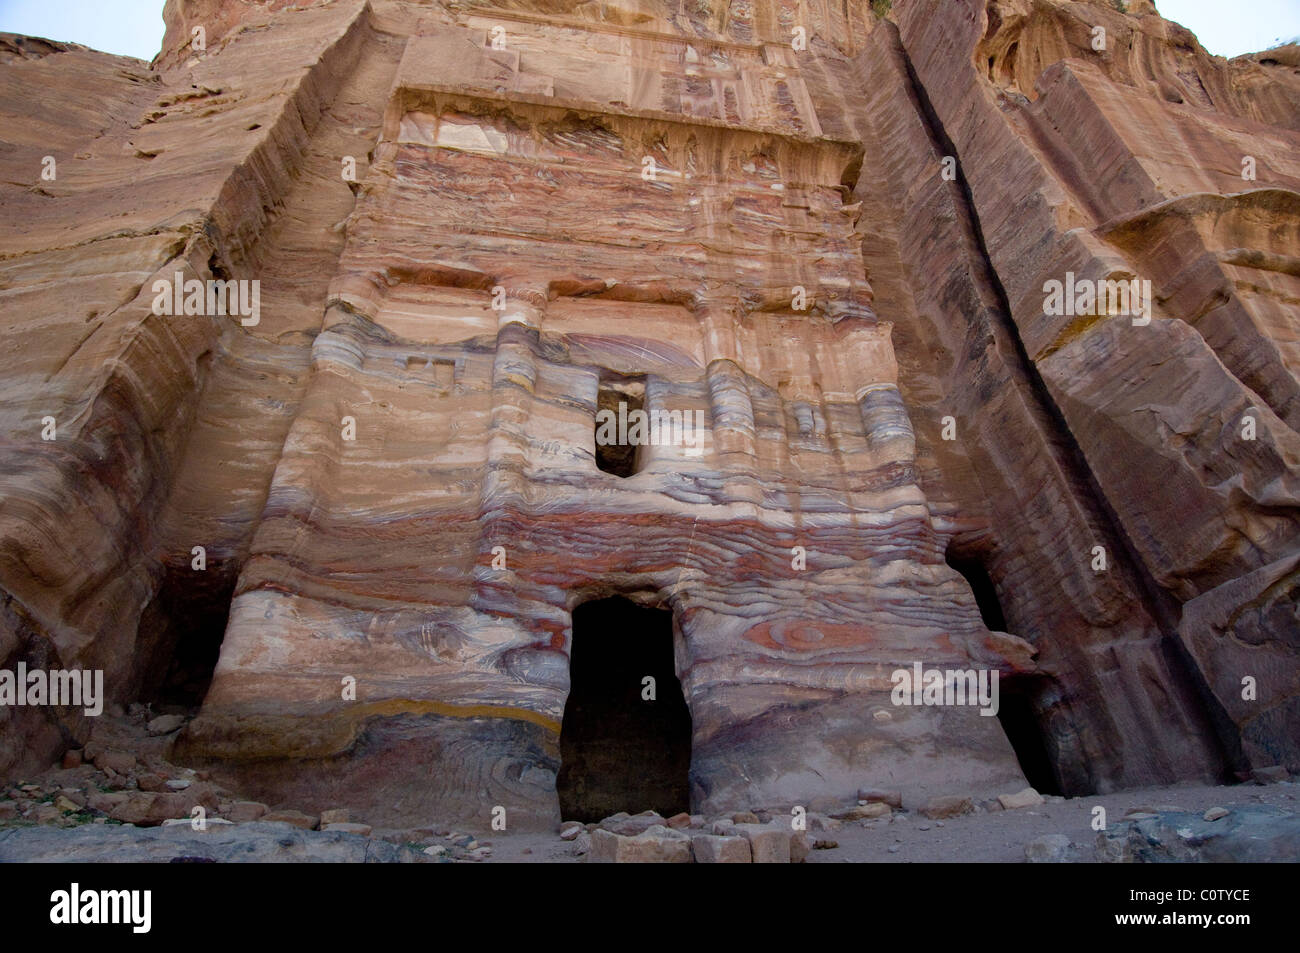 Jordan, Ancient Nabataean city of Petra. The Silk Tomb, named for the colorful sandstone rock striations on the facade. Stock Photo